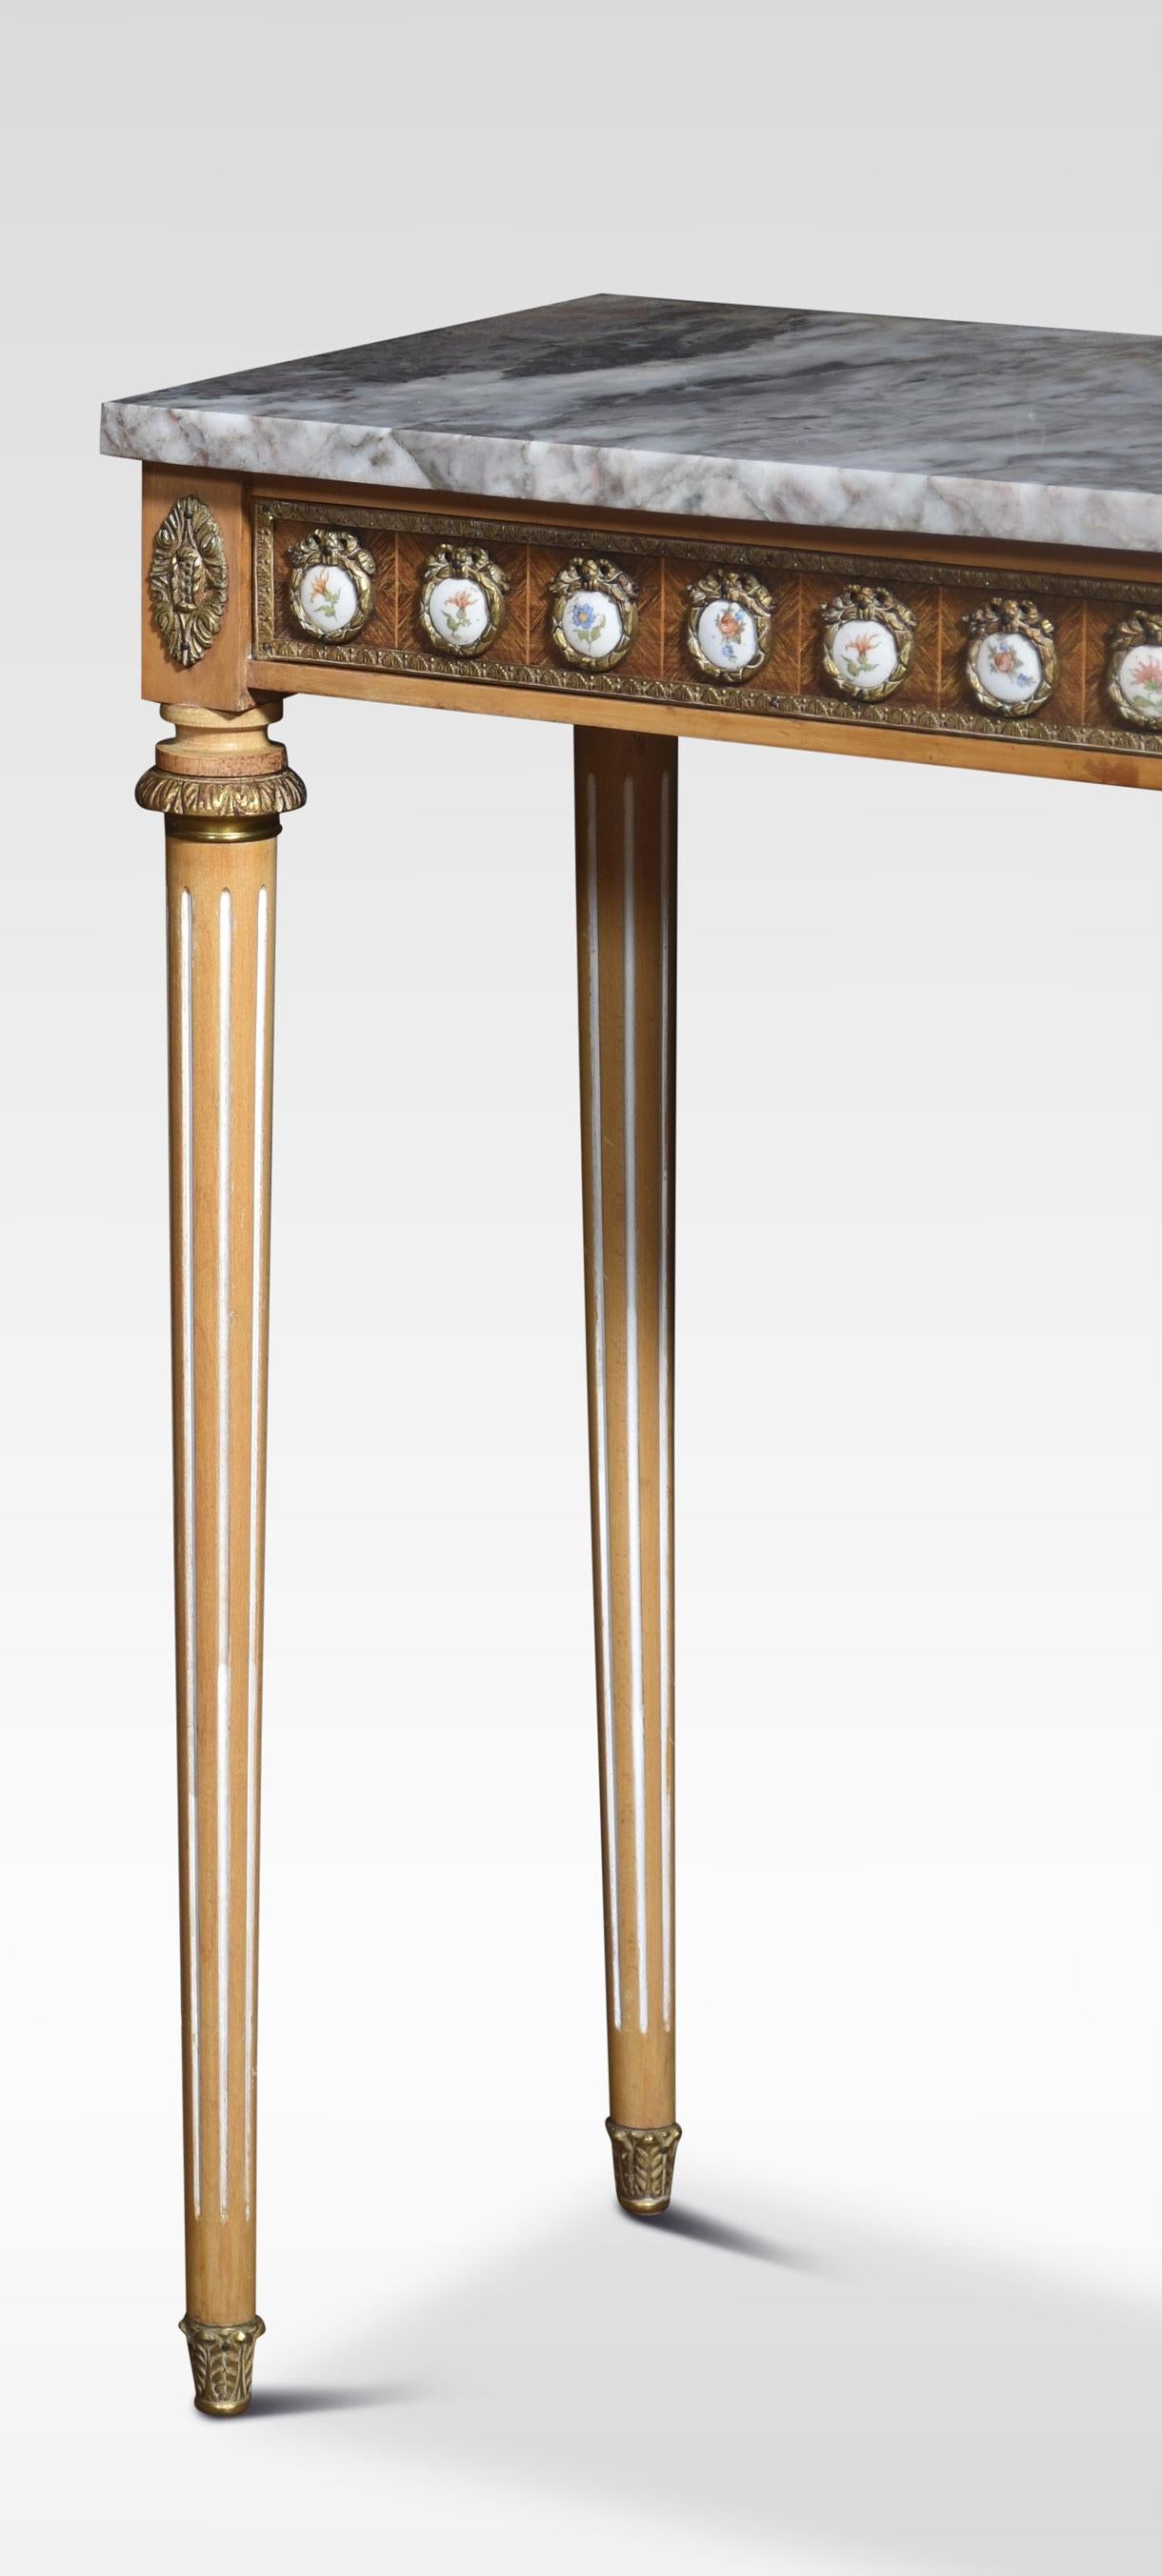 British Pair of Louis XVI revival console tables by H & L Epstein